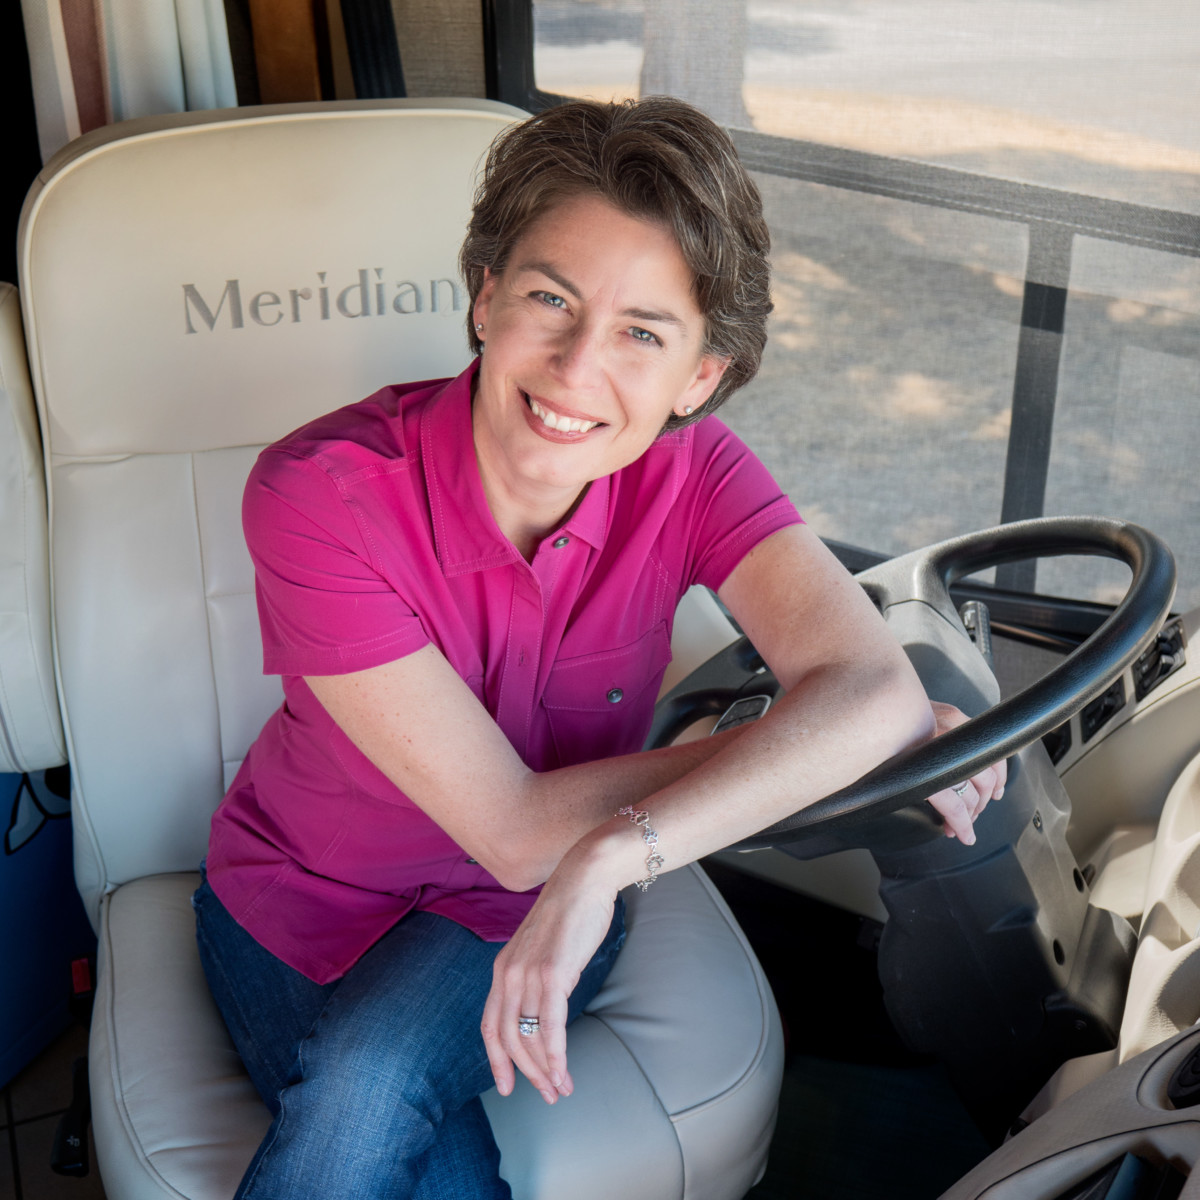 Amy Burkert wears a bright pink shirt while leaning on the steering wheel of her RV